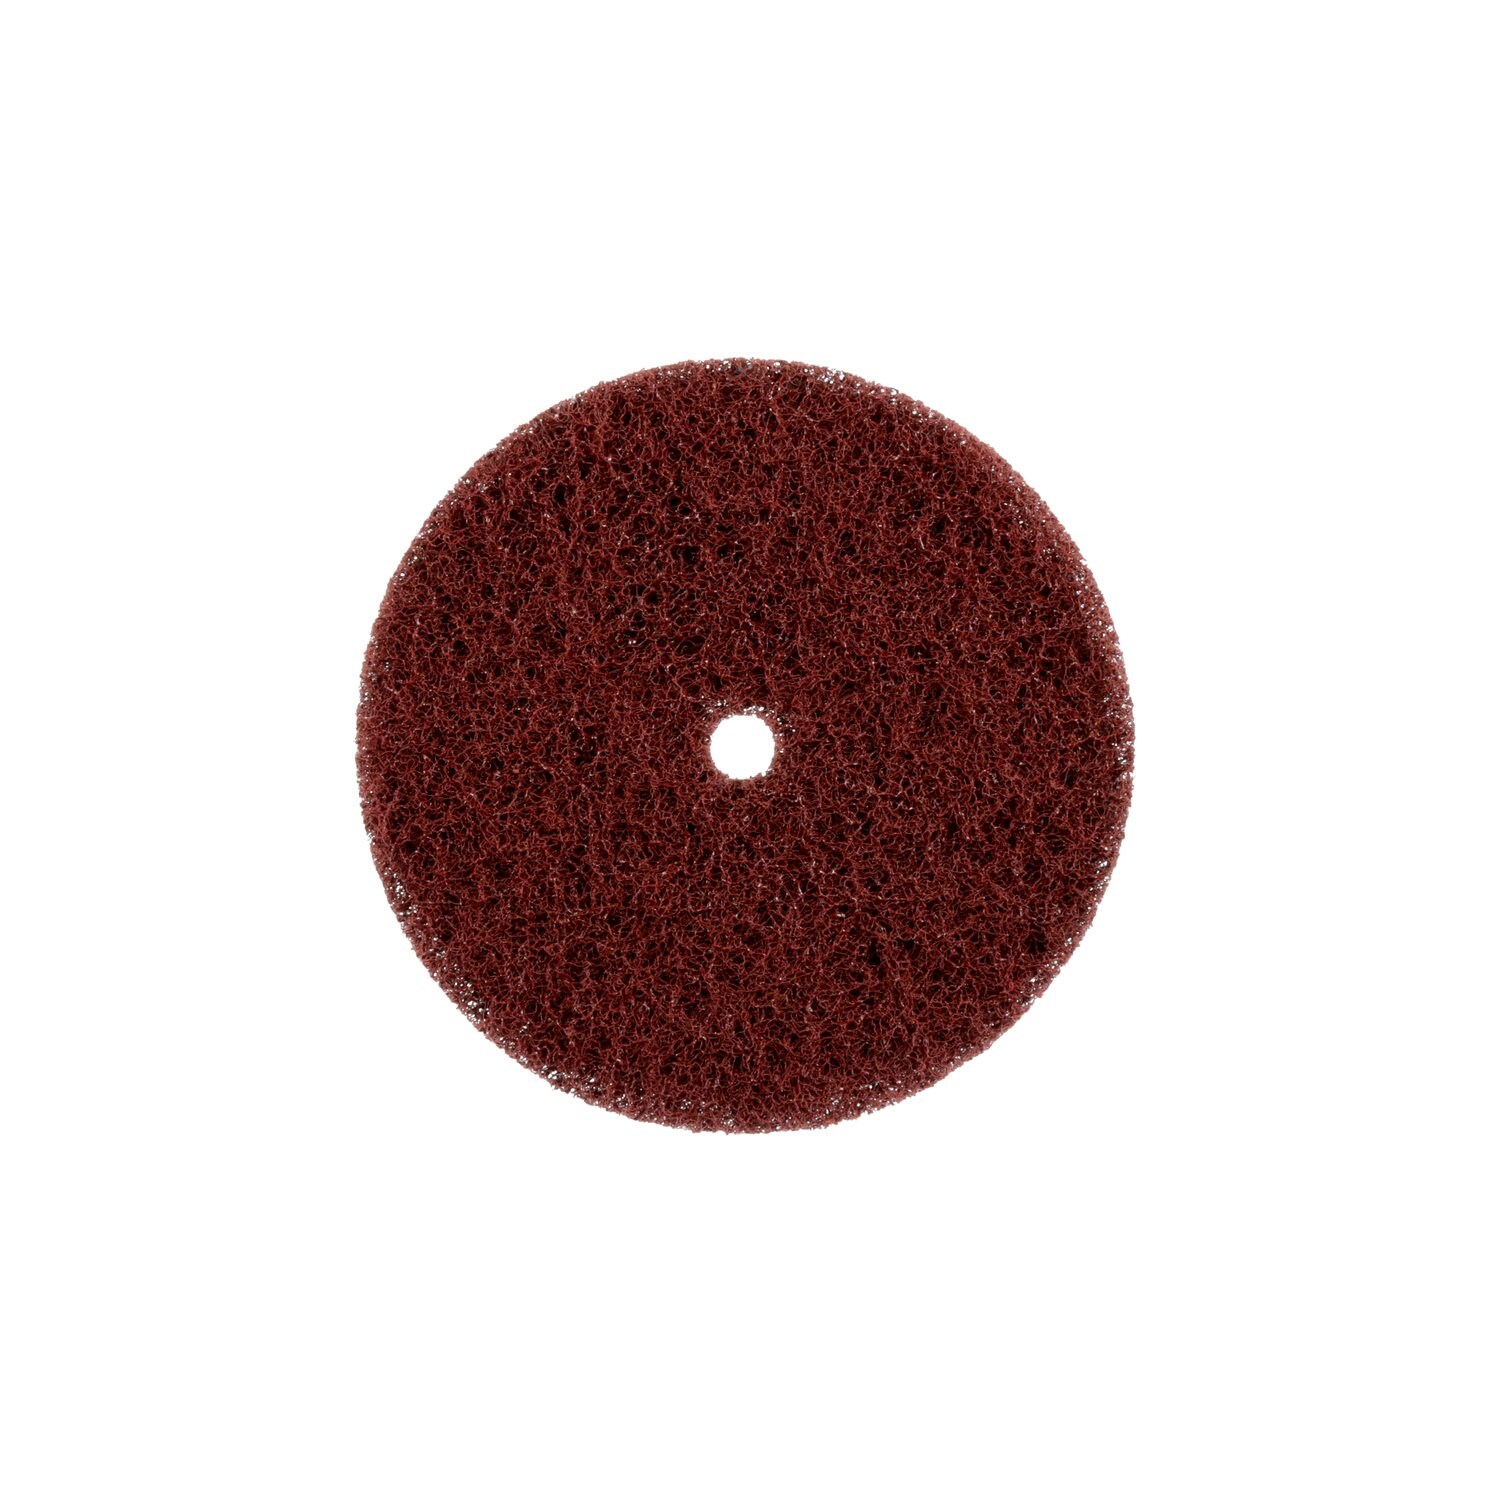 7010330841 - Standard Abrasives Buff and Blend Hook and Loop EP Disc, 820408, 4 in x
1/2 in A VFN, 10/Bag, 100 ea/Case